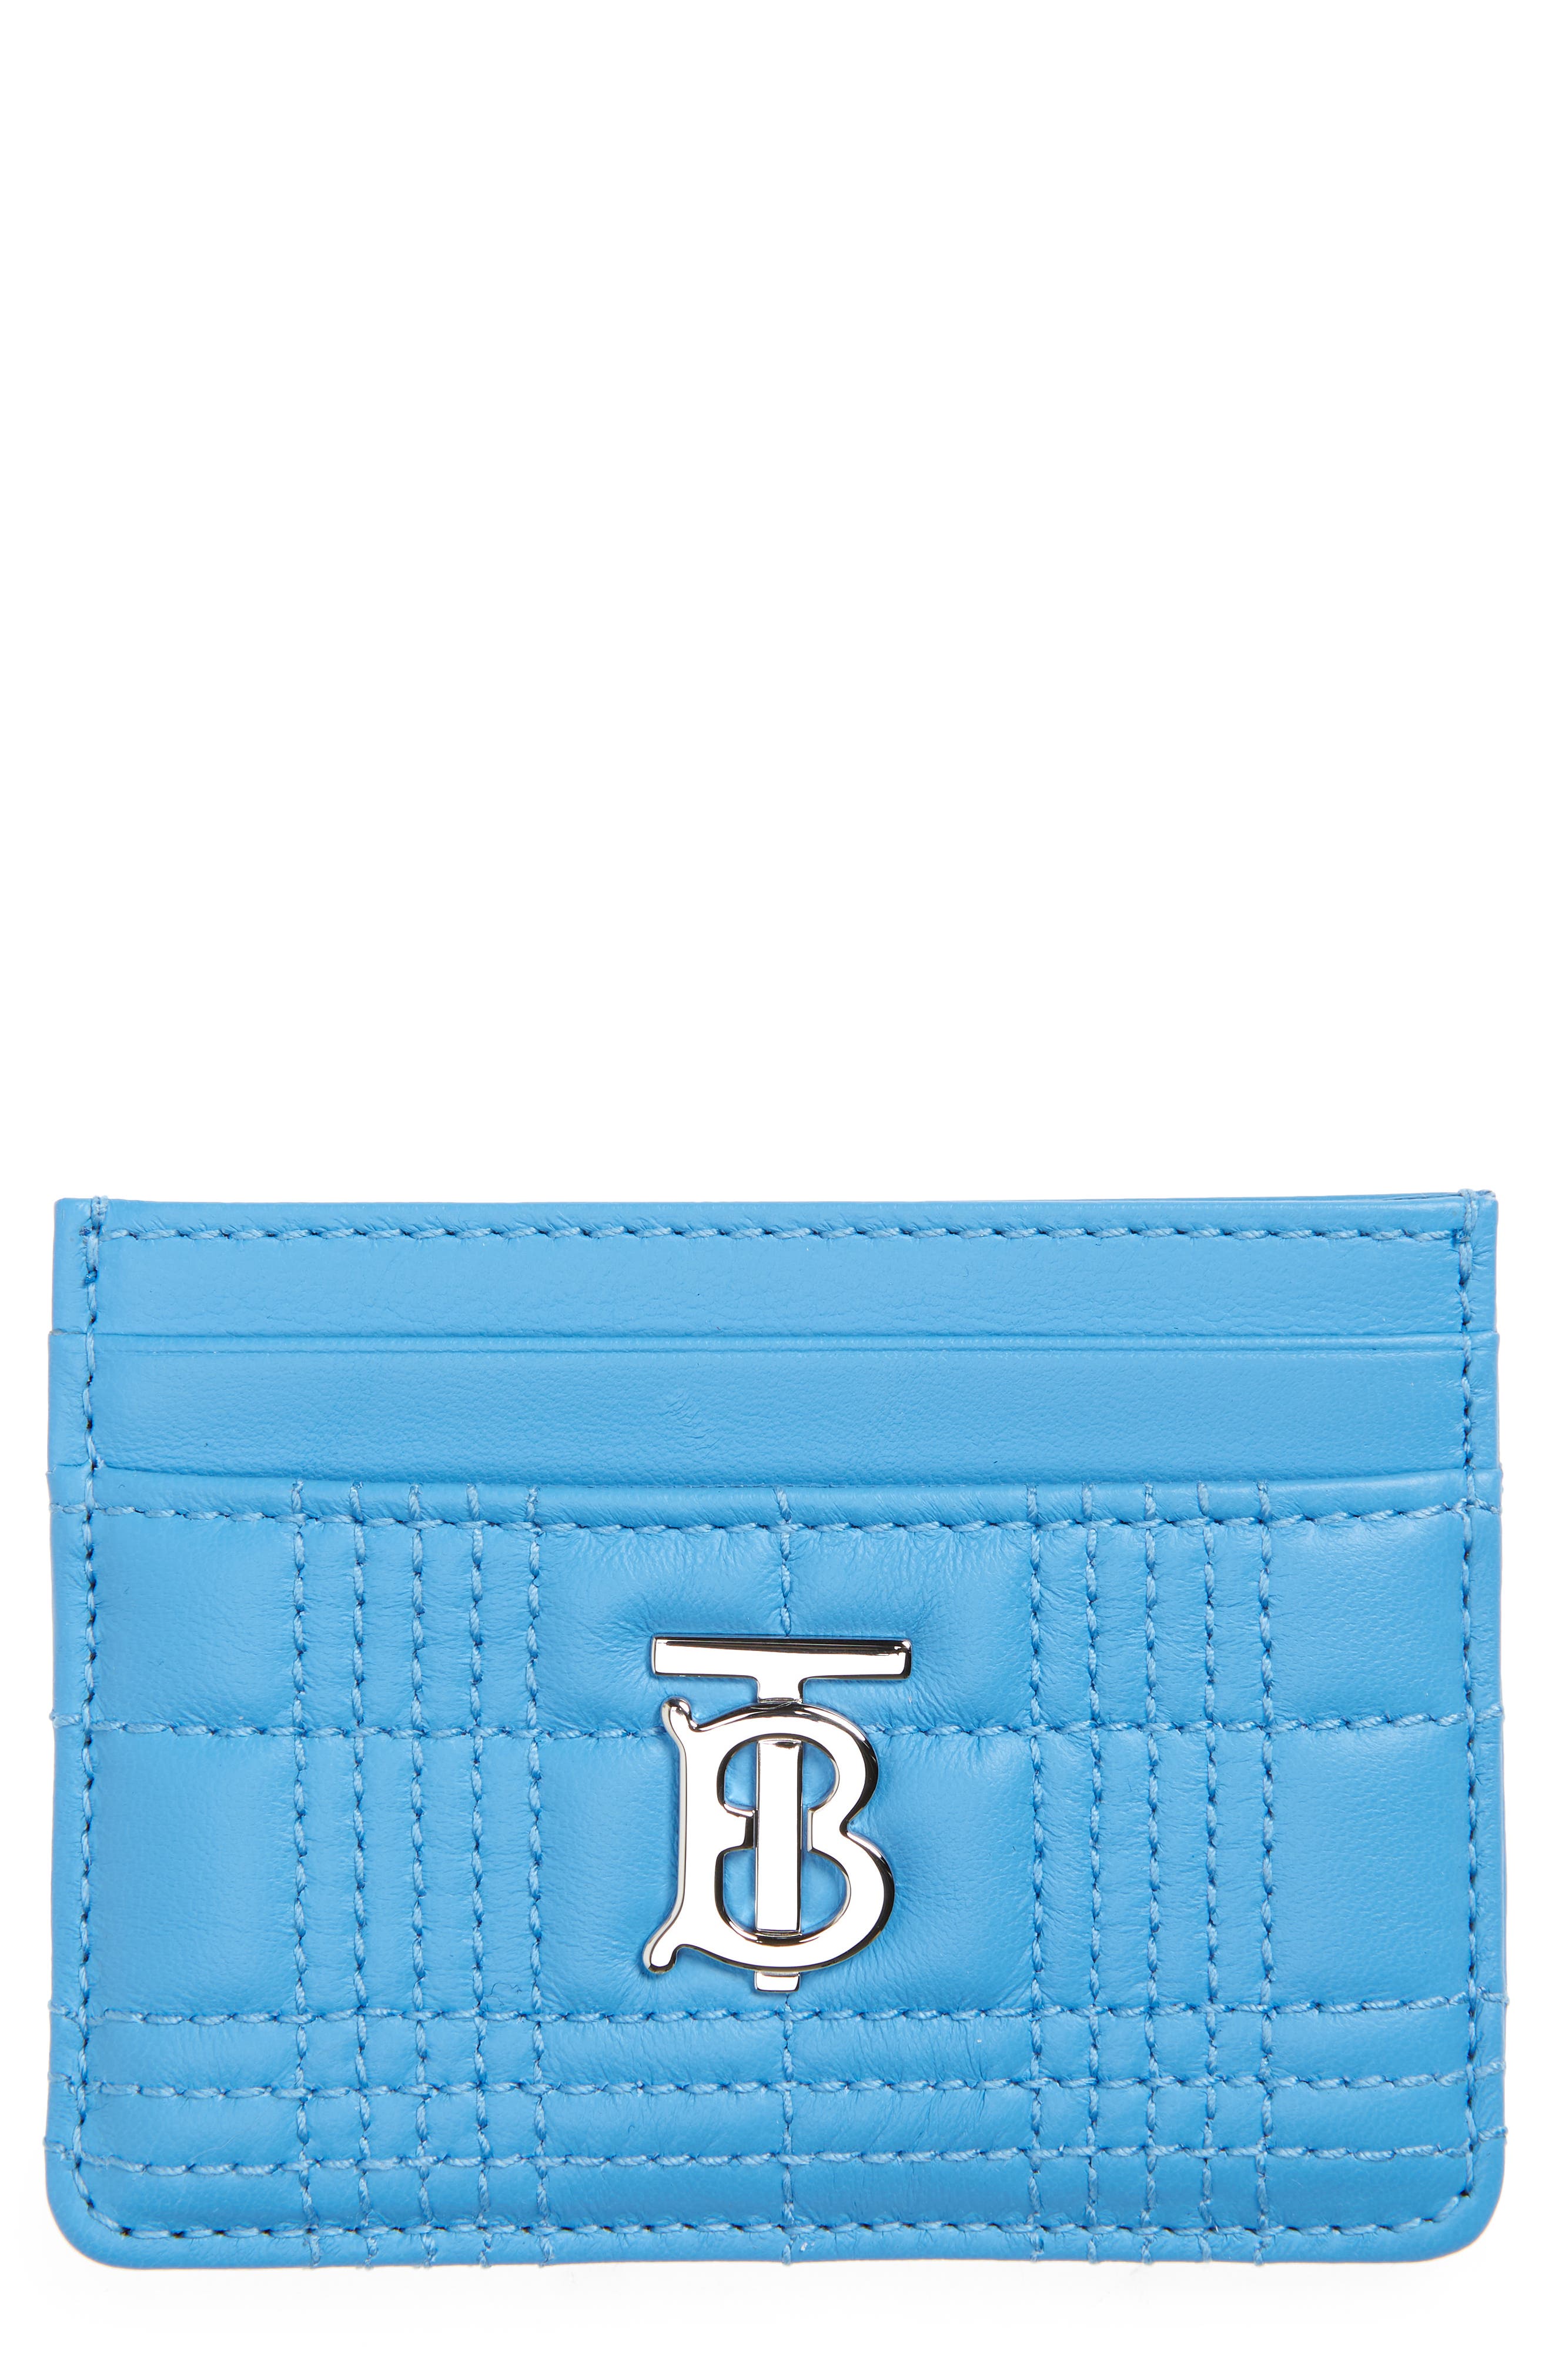 Burberry Lola Quilted Leather Card Case in Bright Sky Blue at Nordstrom